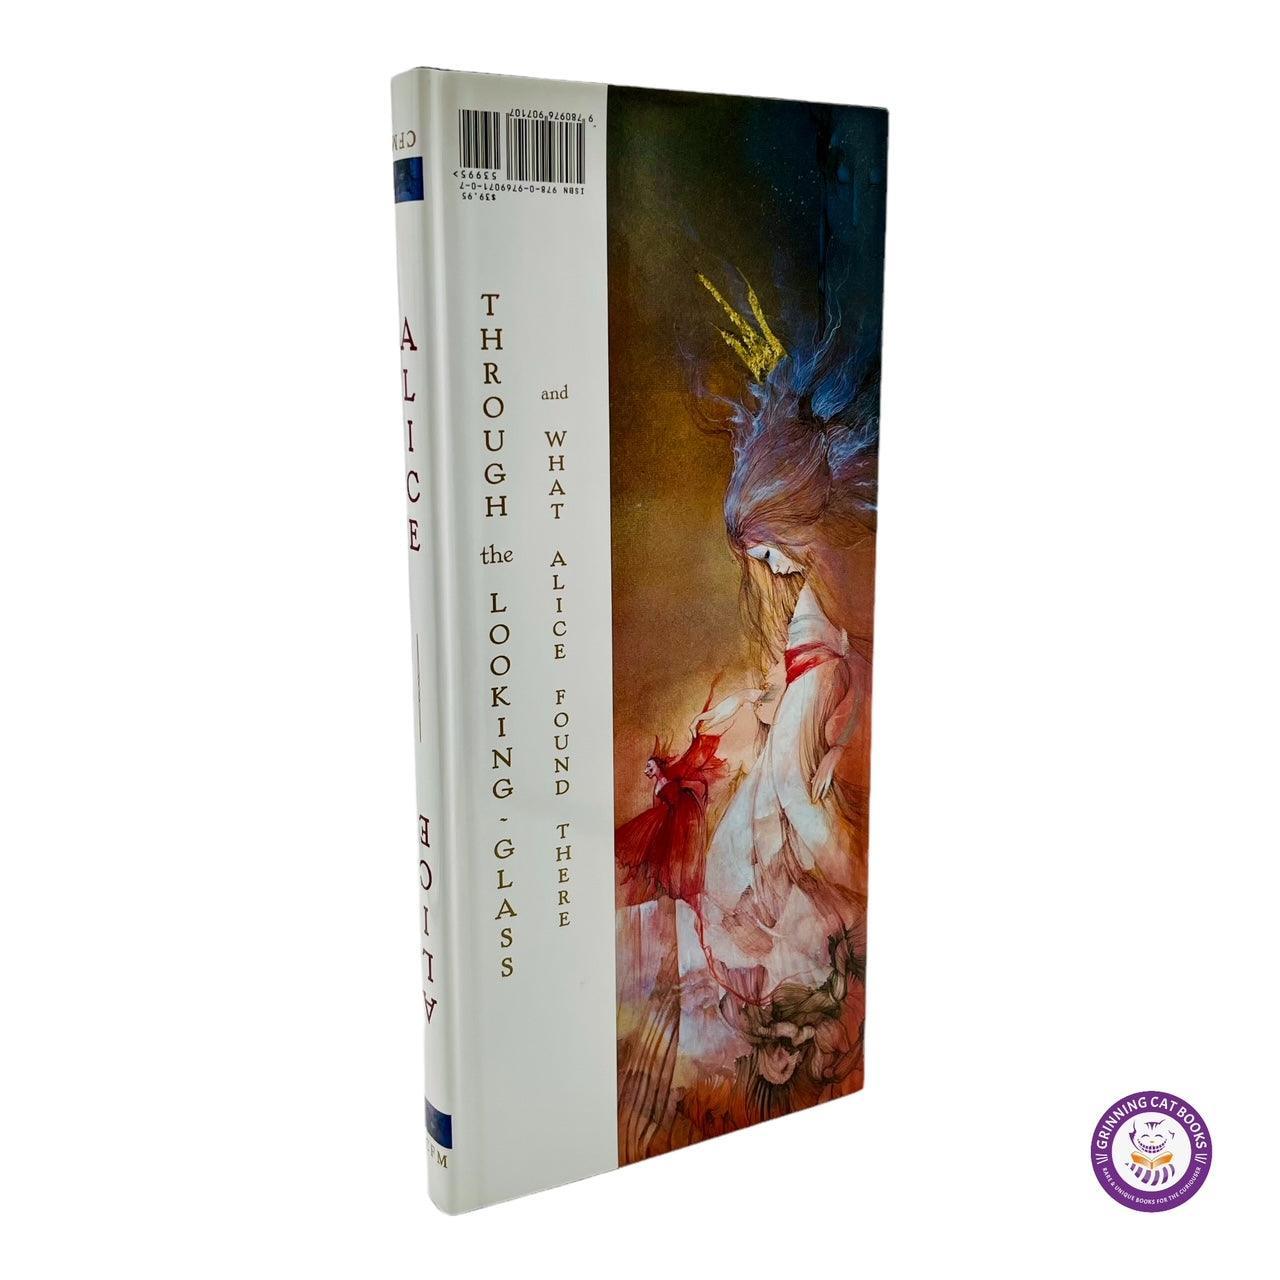 Alice in Wonderland & Through the Looking Glass (signed by artist, Anne Bachelier) - Grinning Cat Books - CHILDREN'S LITERATURE - ALICE, ENGLISH LITERATURE, SIGNED